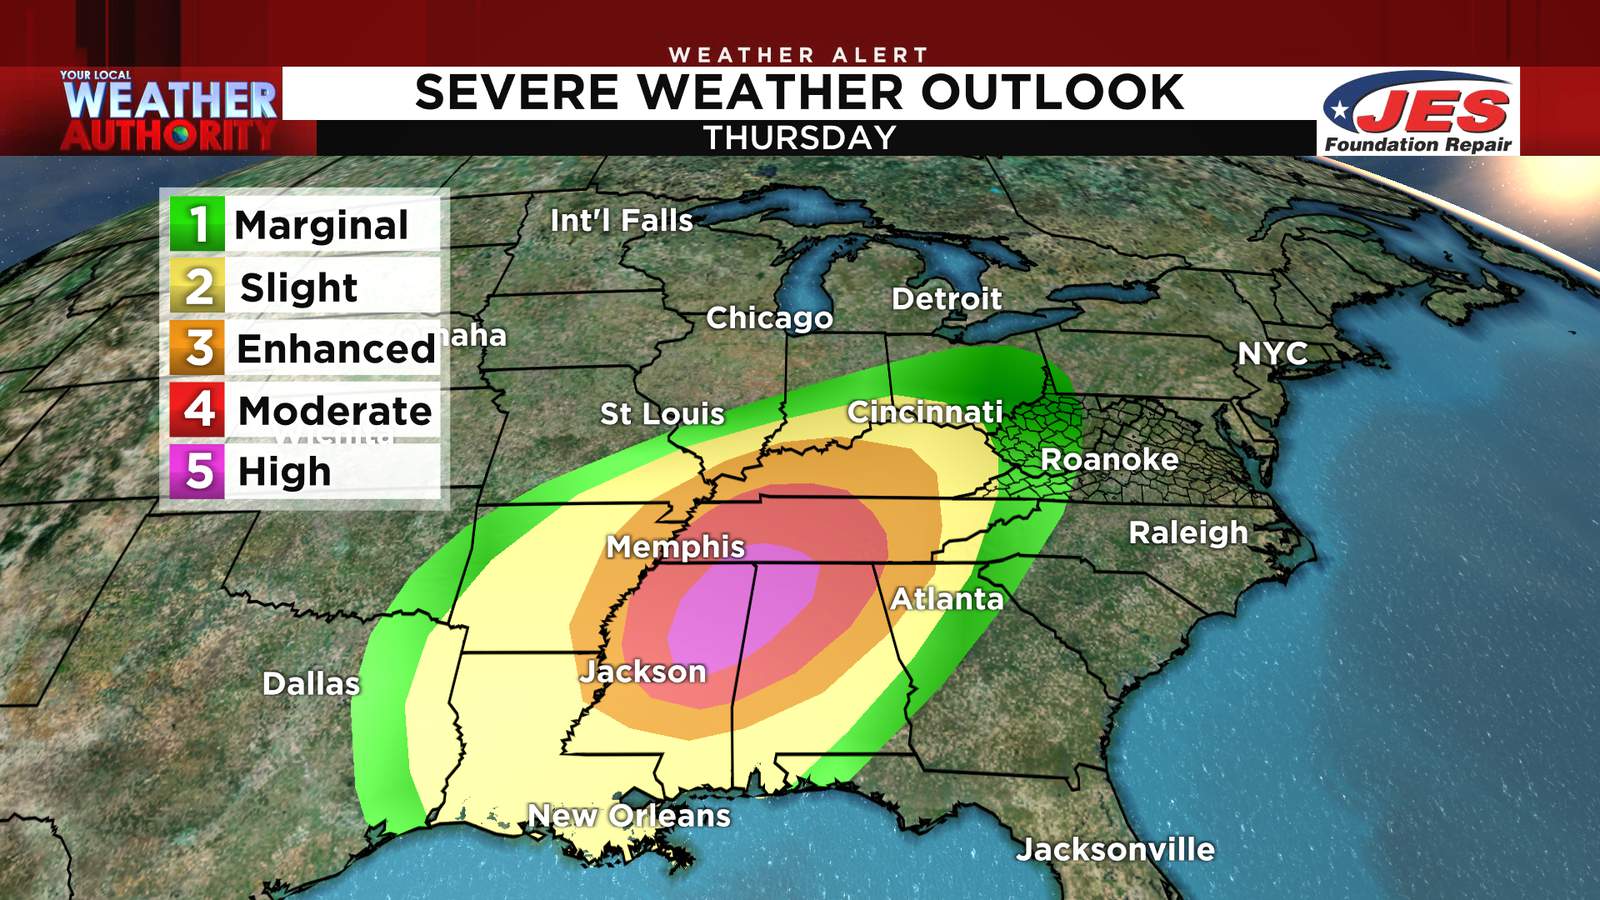 Severe weather outbreak south gives us rain, possible storms through early Friday morning